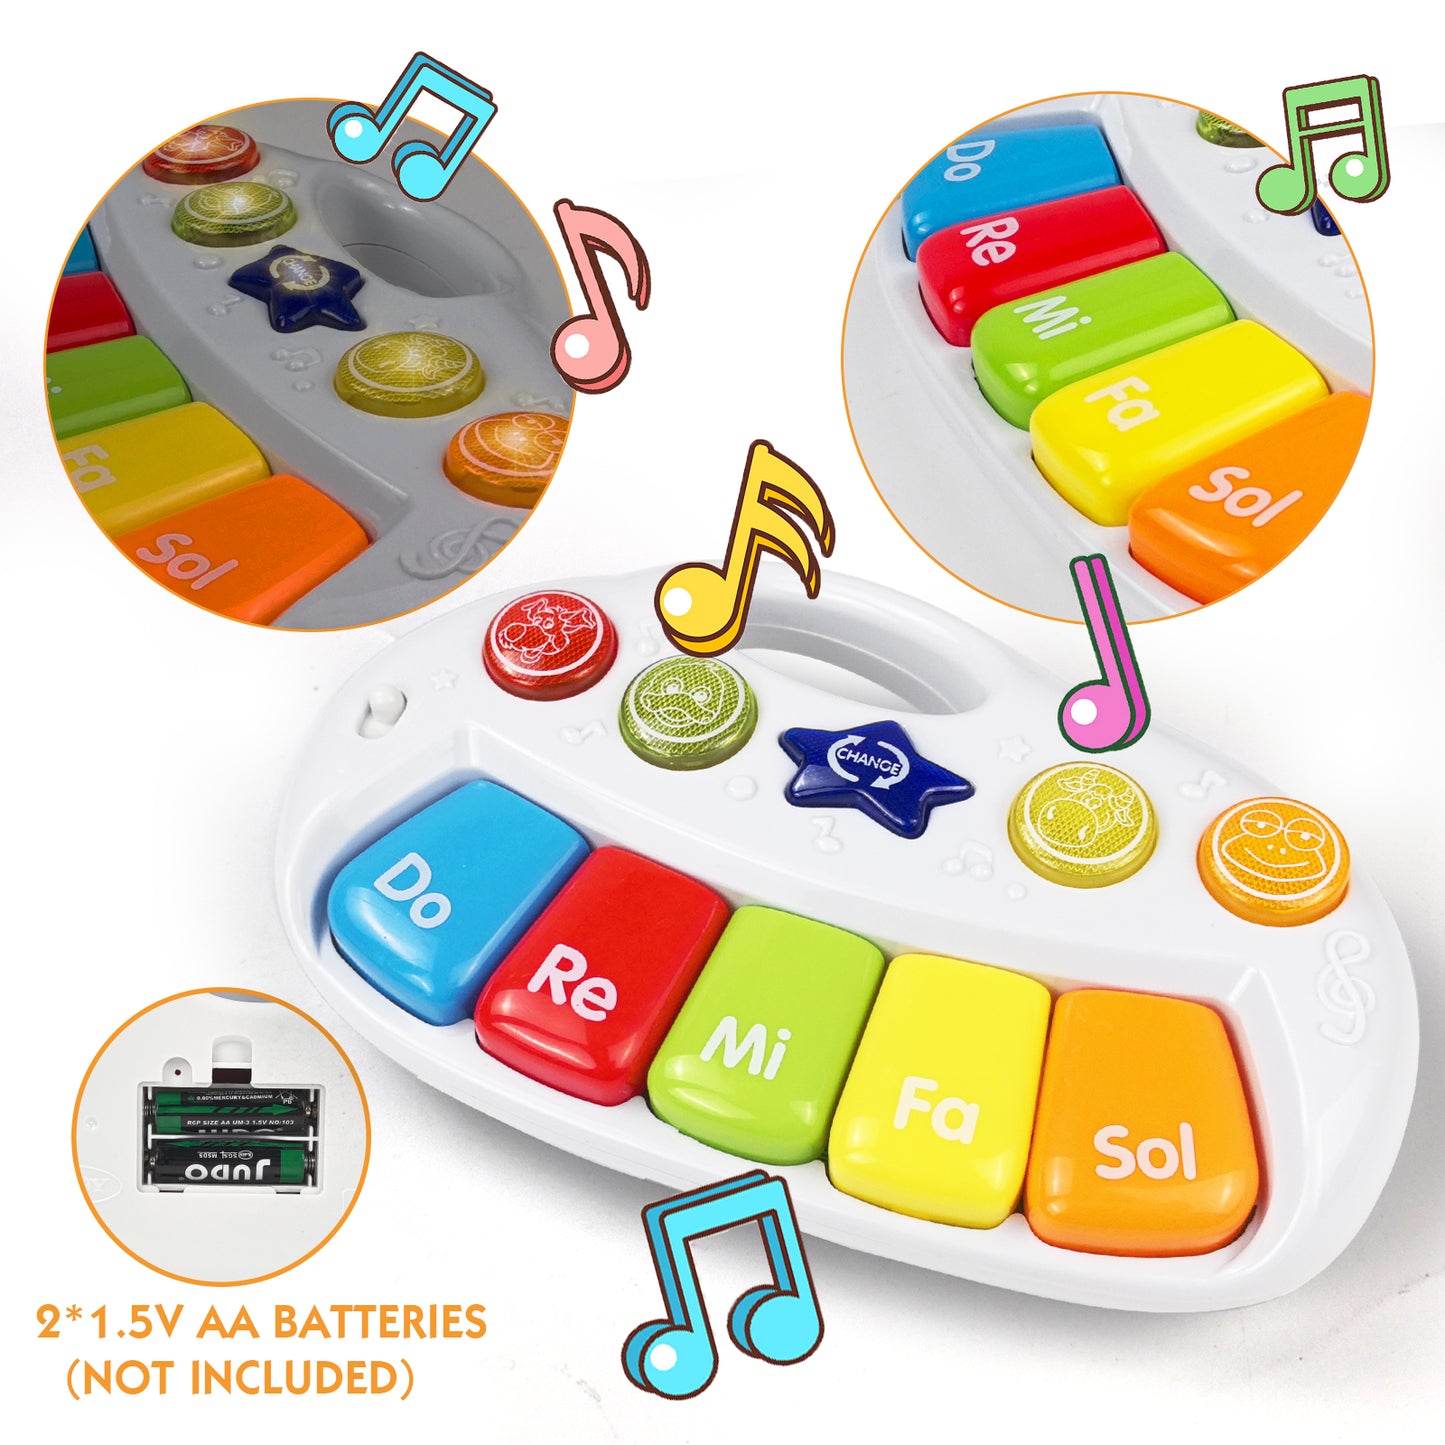 AOQIMITENJOY Musical Instrument Electronic 5 Keys Keyboard Toys LED Lighting Children's Toys Birthday Gifts for Boys and Girls 3 Year Old+ HK-1307A